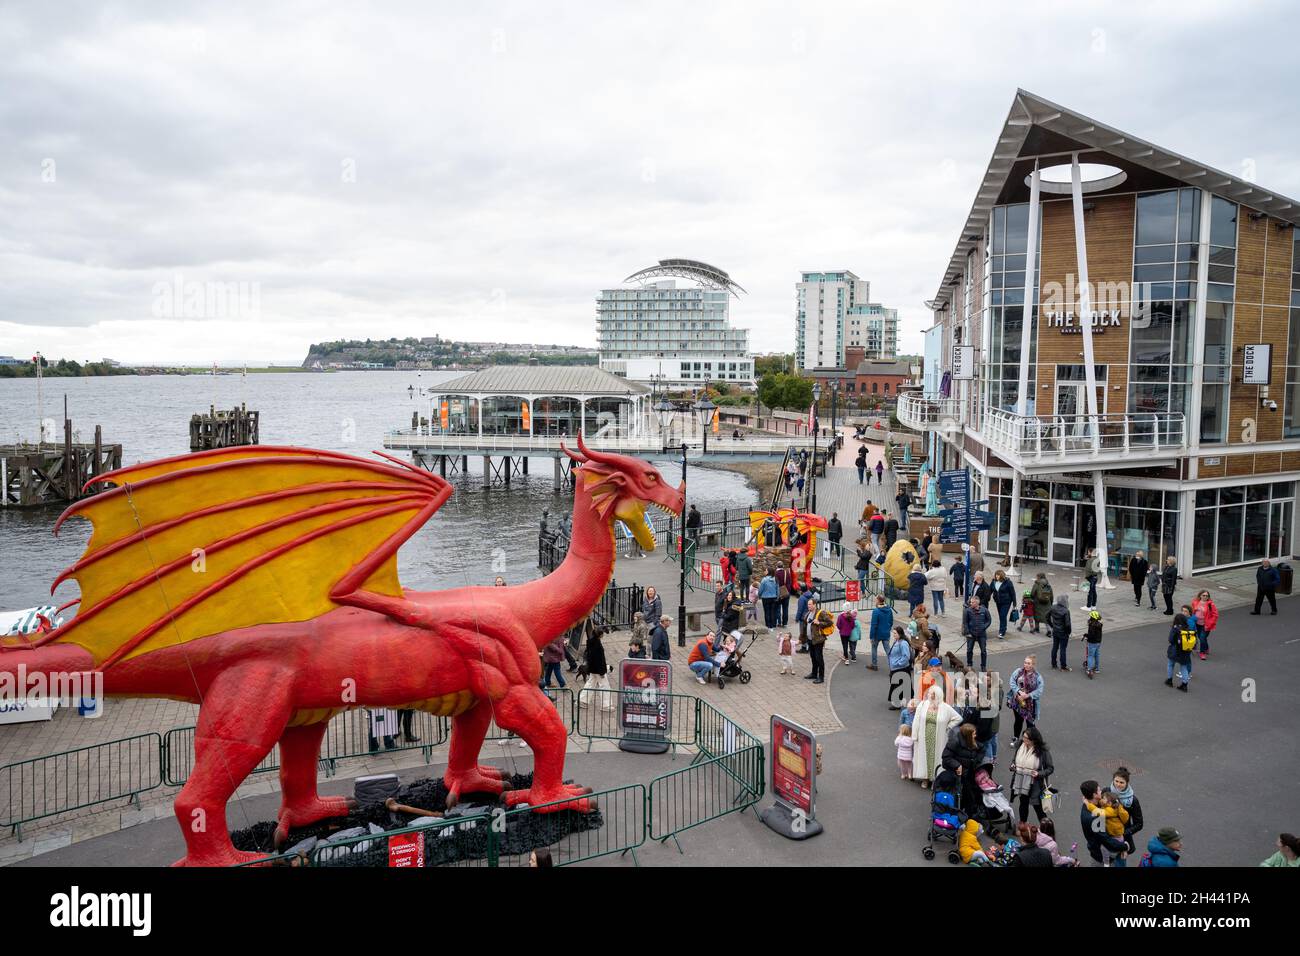 CARDIFF, WALES - OCTOBER 23: A 15-metre-long and six-metre-tall animatronic dragon in Tacoma Square, Mermaid Quay on October 23, 2021 in Cardiff, Wale Stock Photo